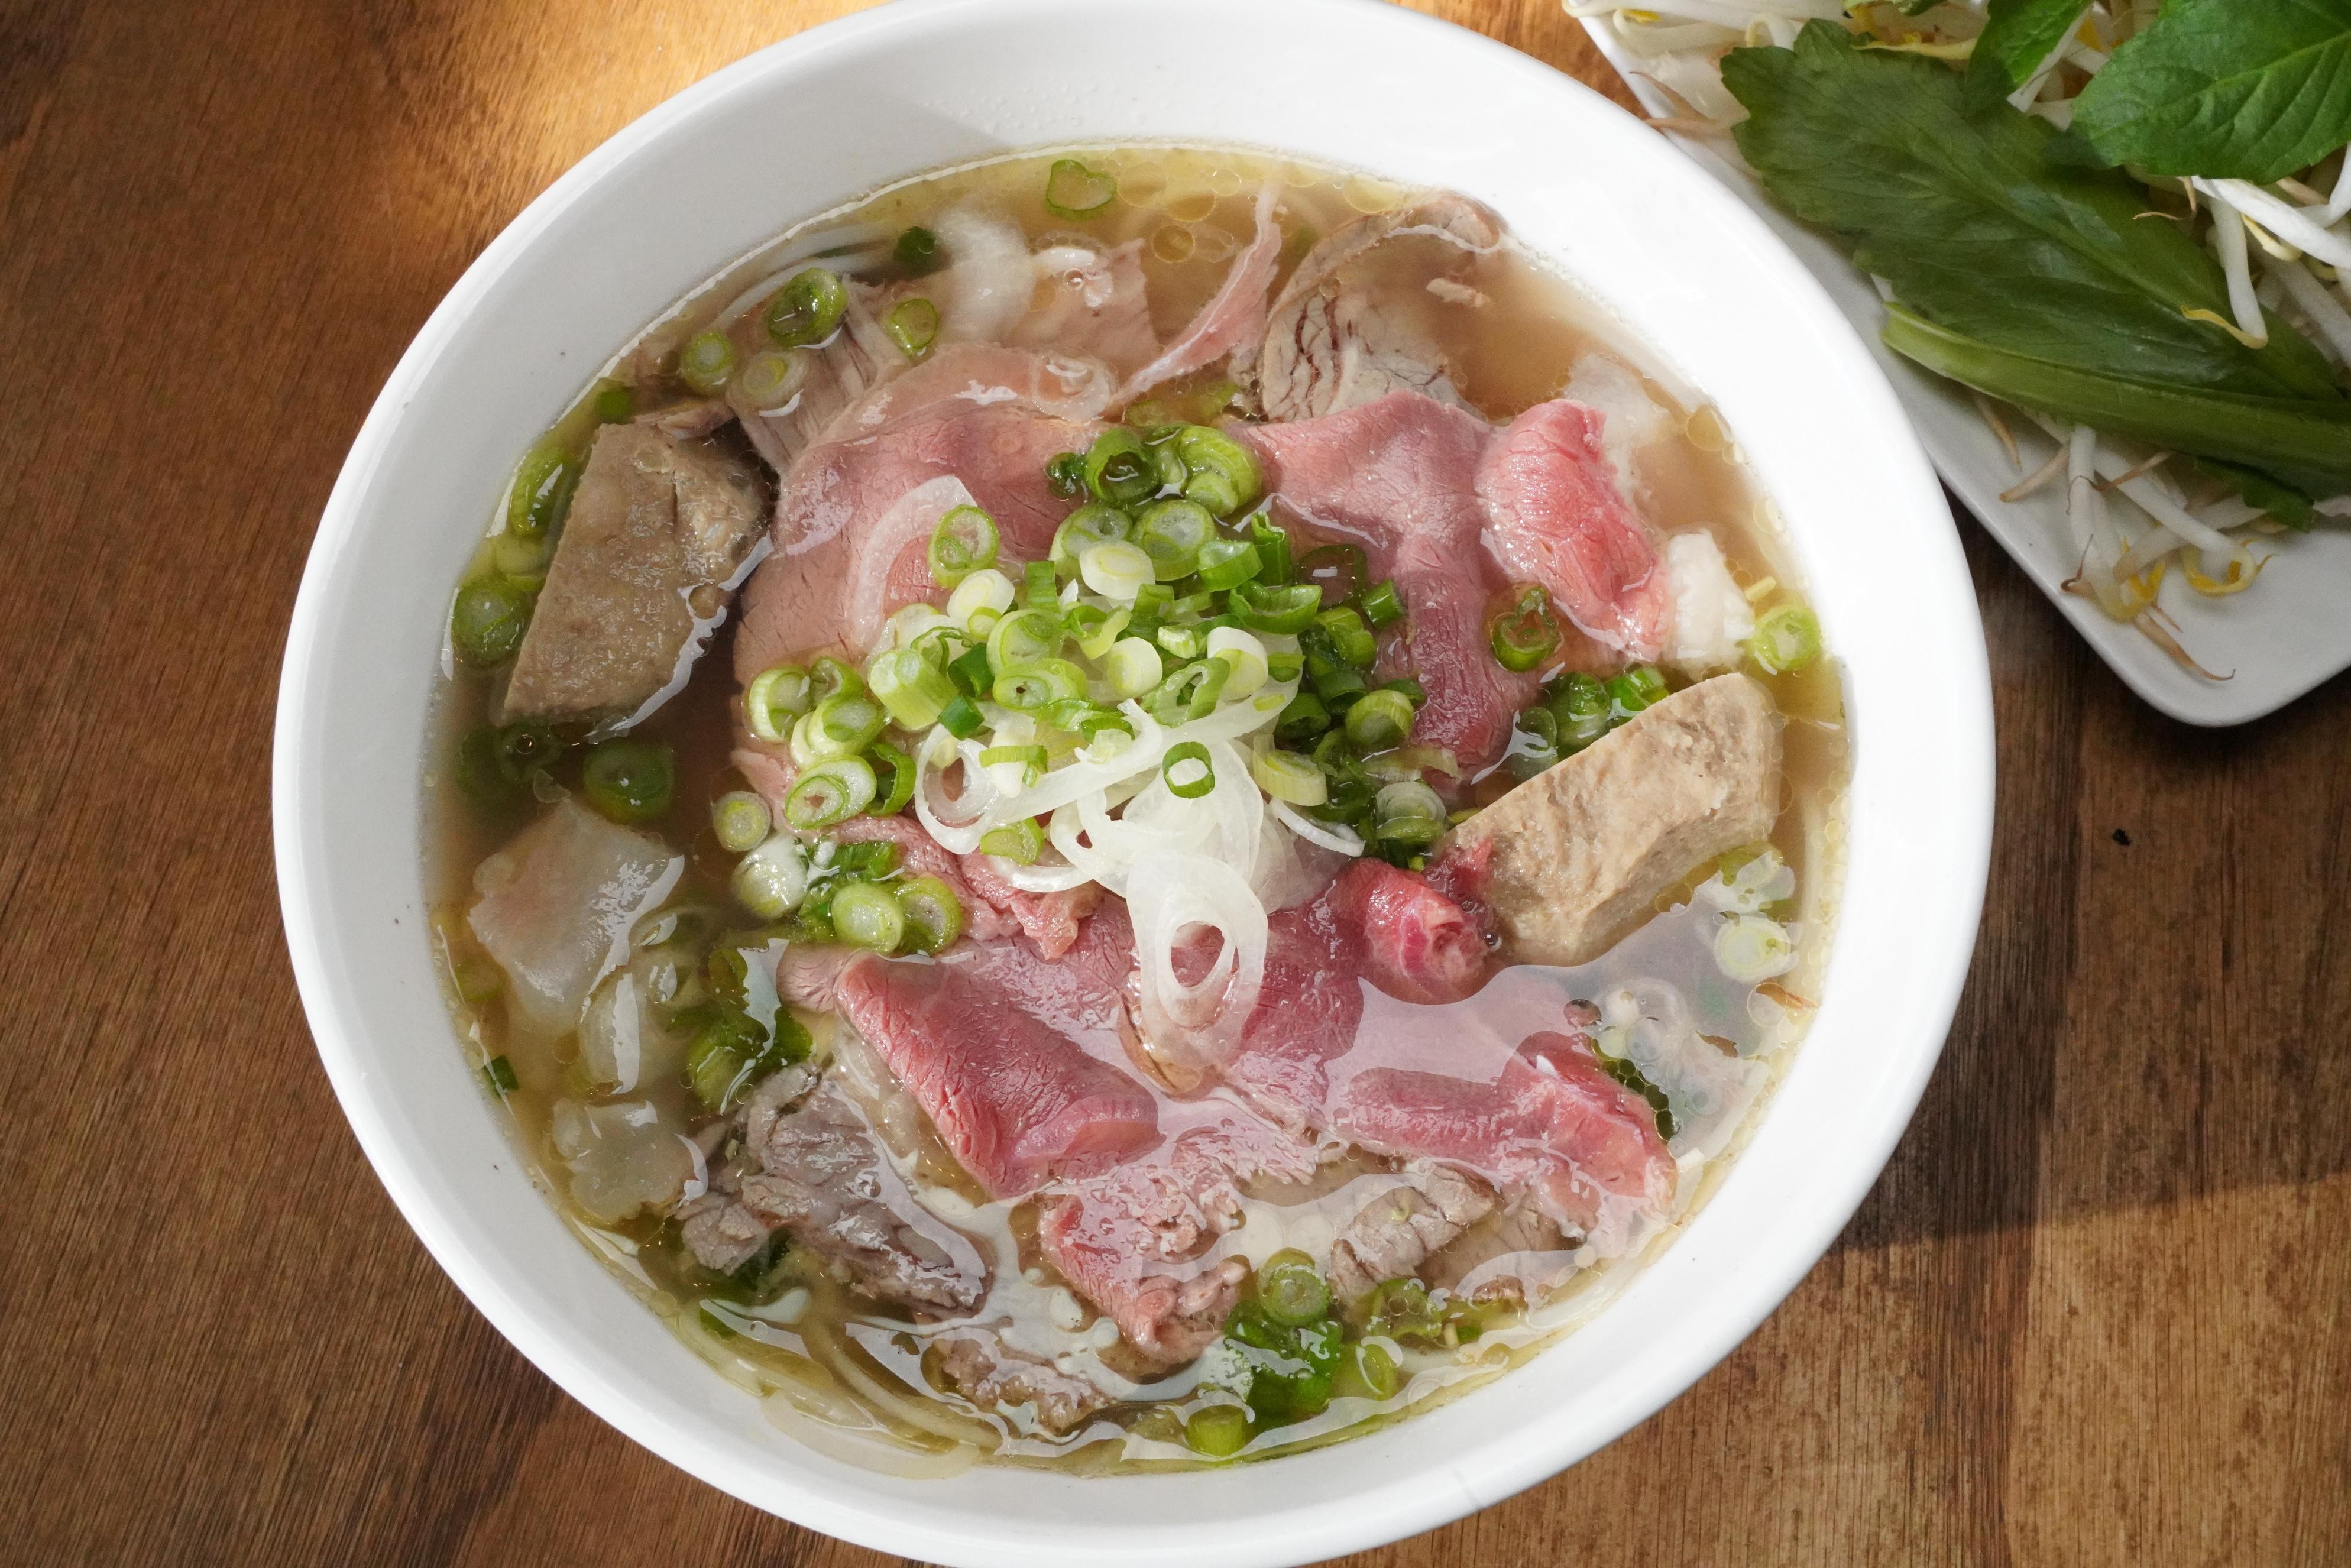 30. House special pho